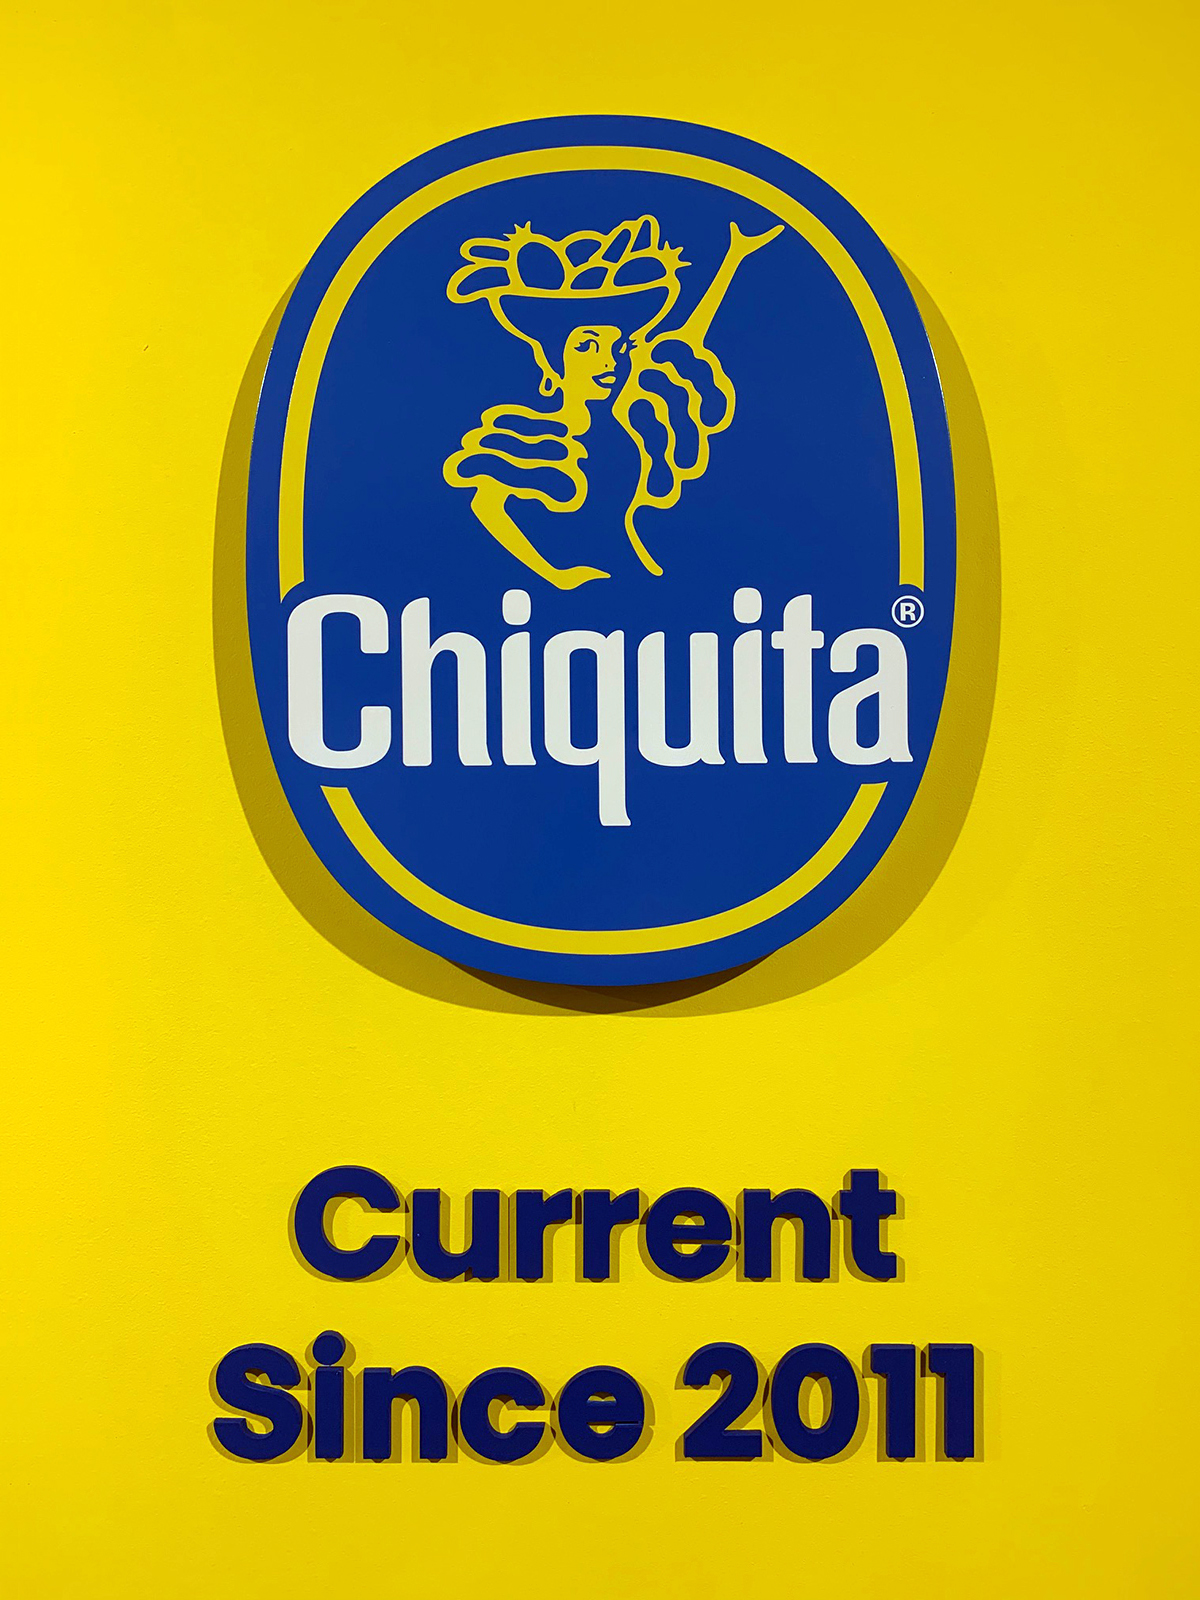 Our iconic Blue Sticker